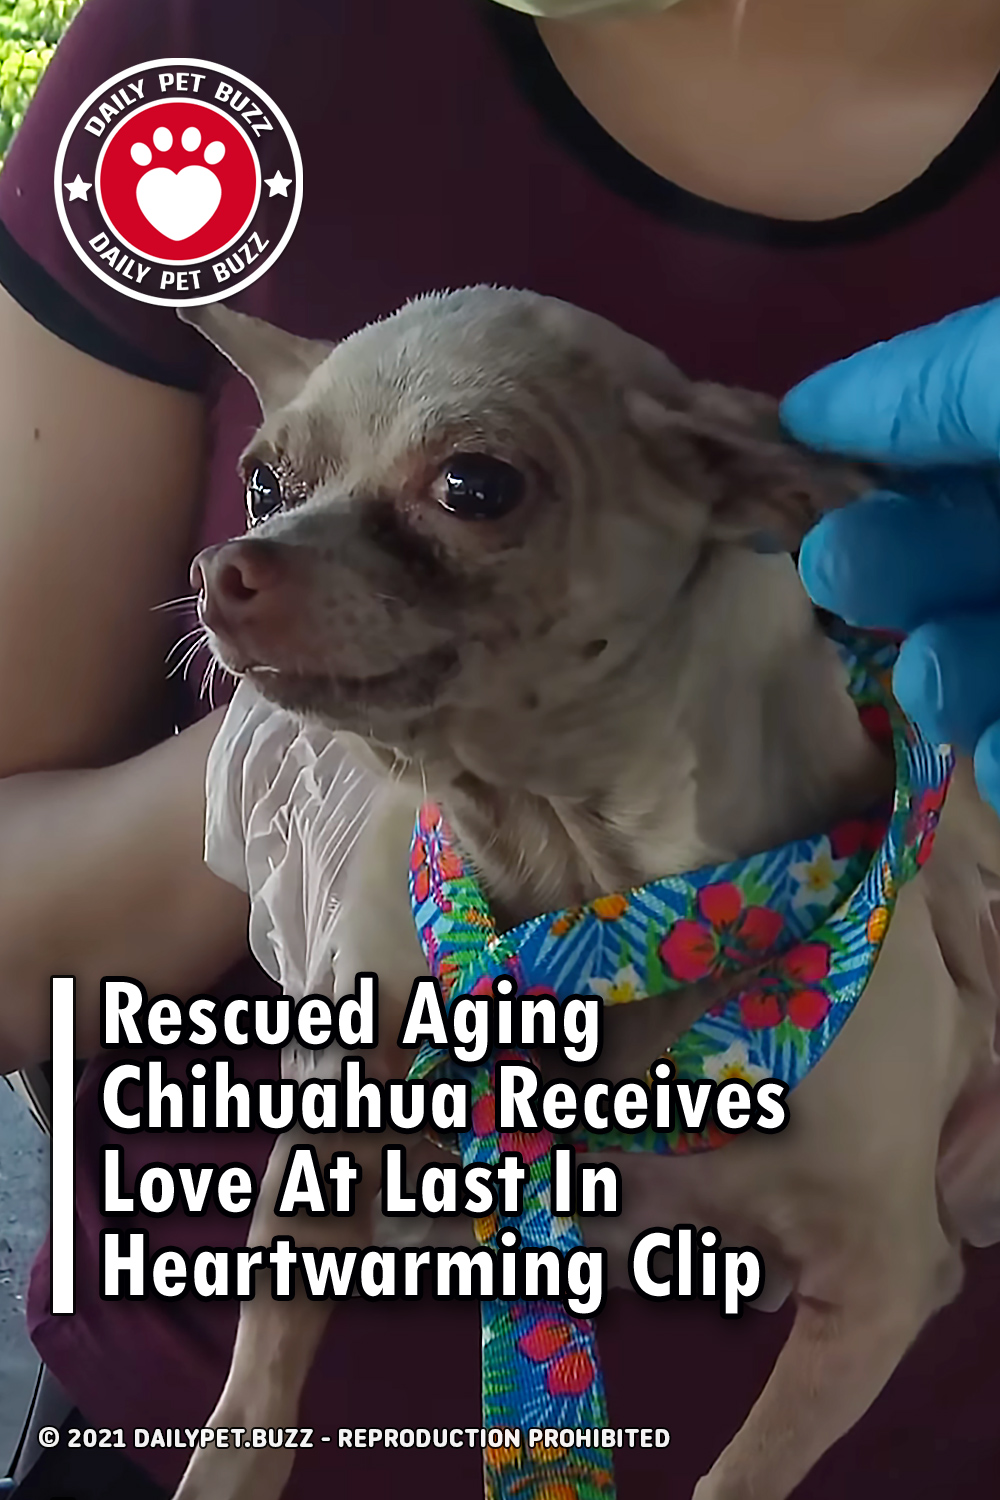 Rescued Aging Chihuahua Receives Love At Last In Heartwarming Clip